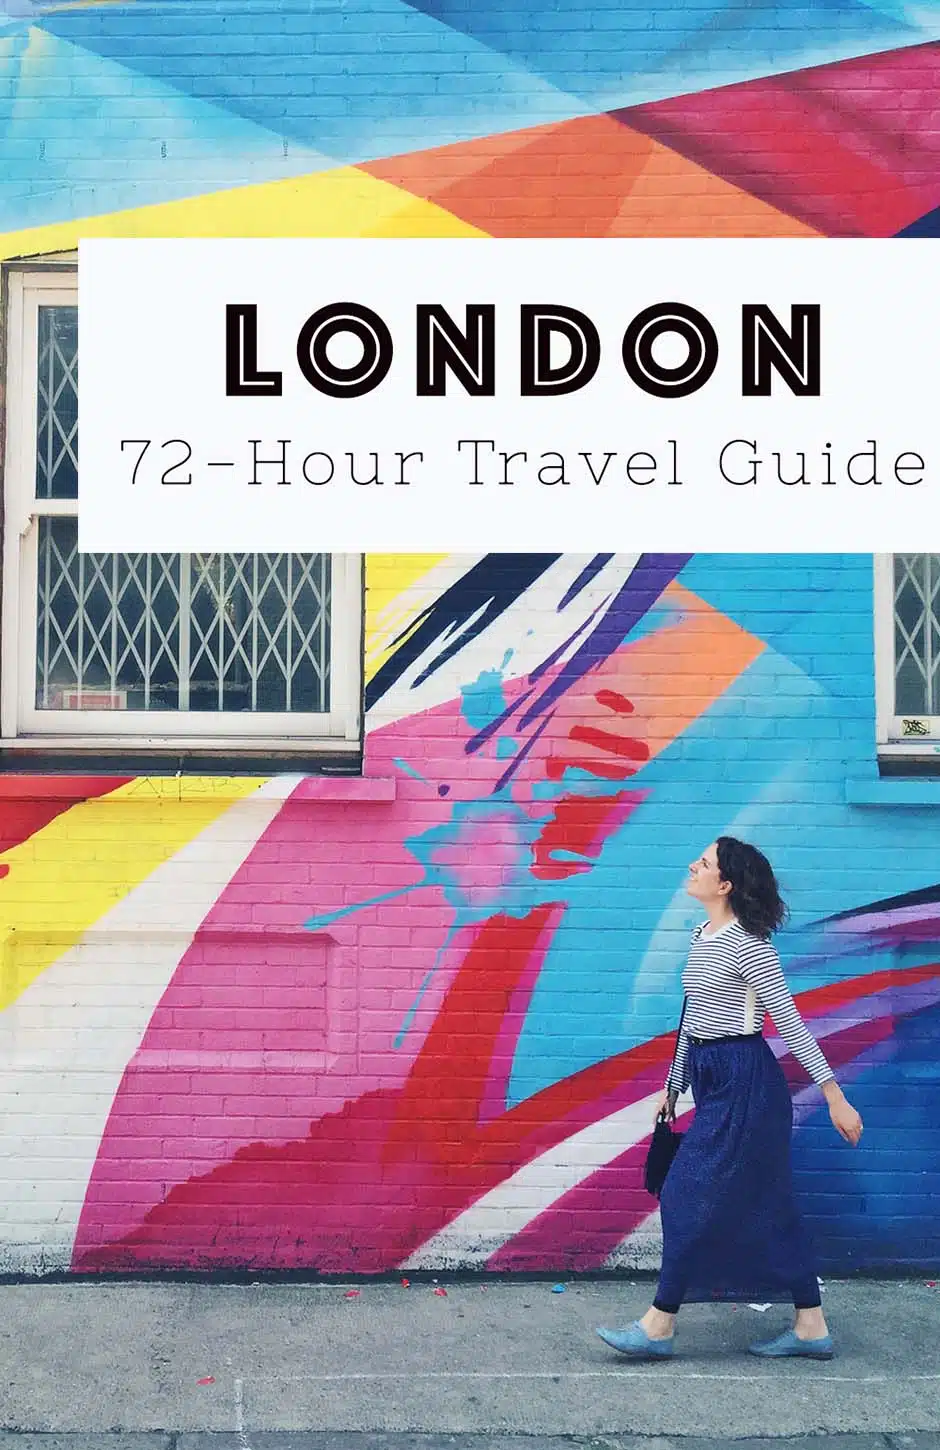 London travel guide - 72 Hours in the city